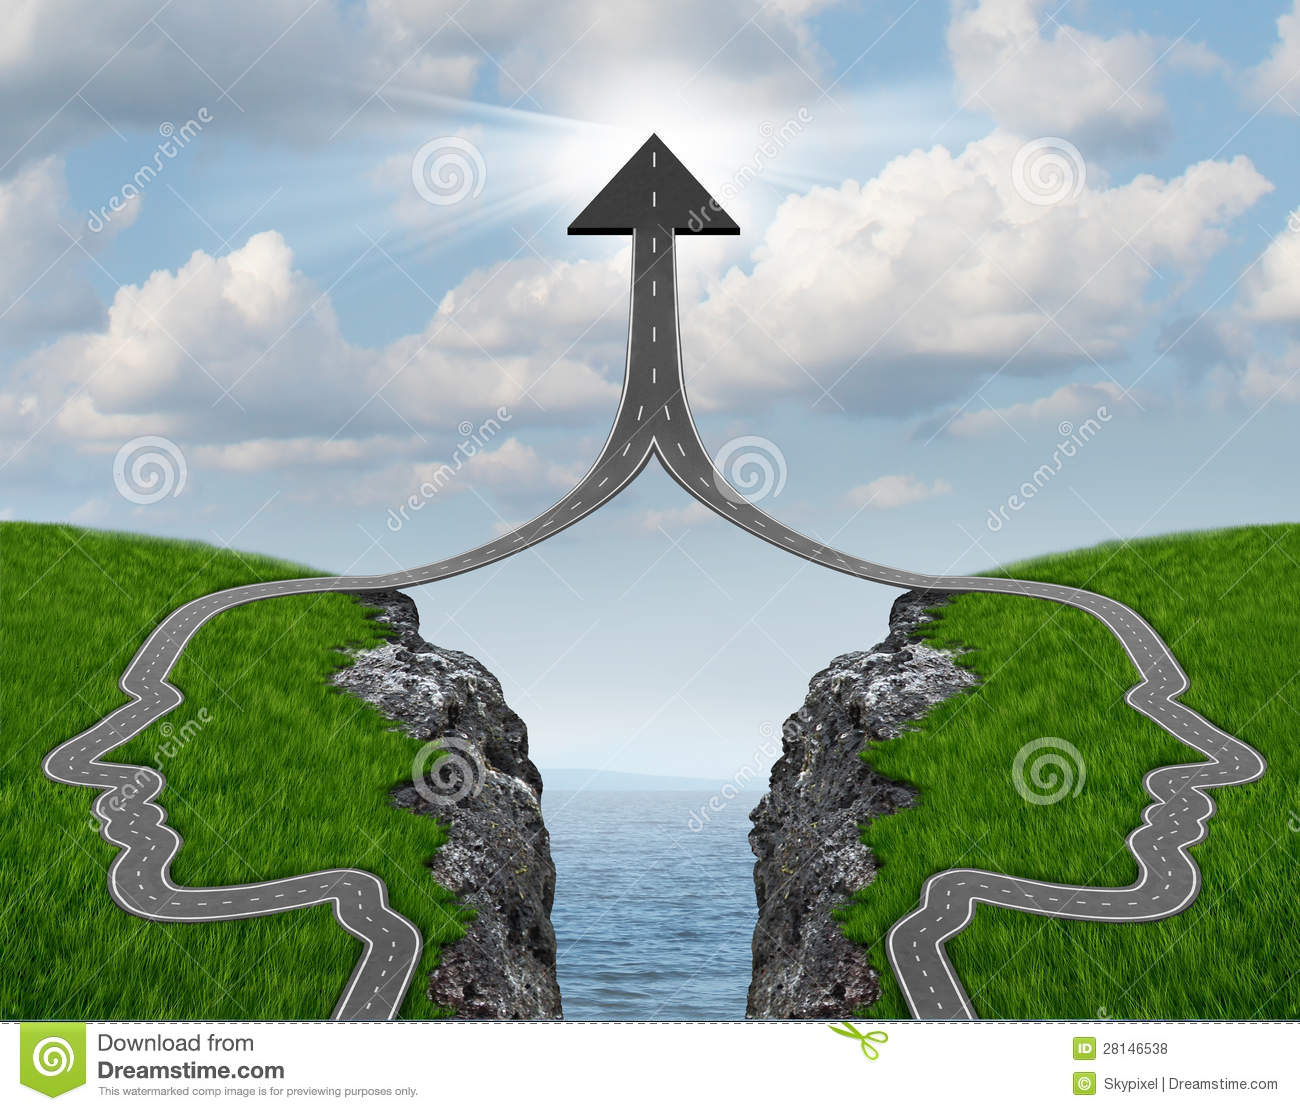 Bridge The Gap And Bridging The Differences Between Two Business